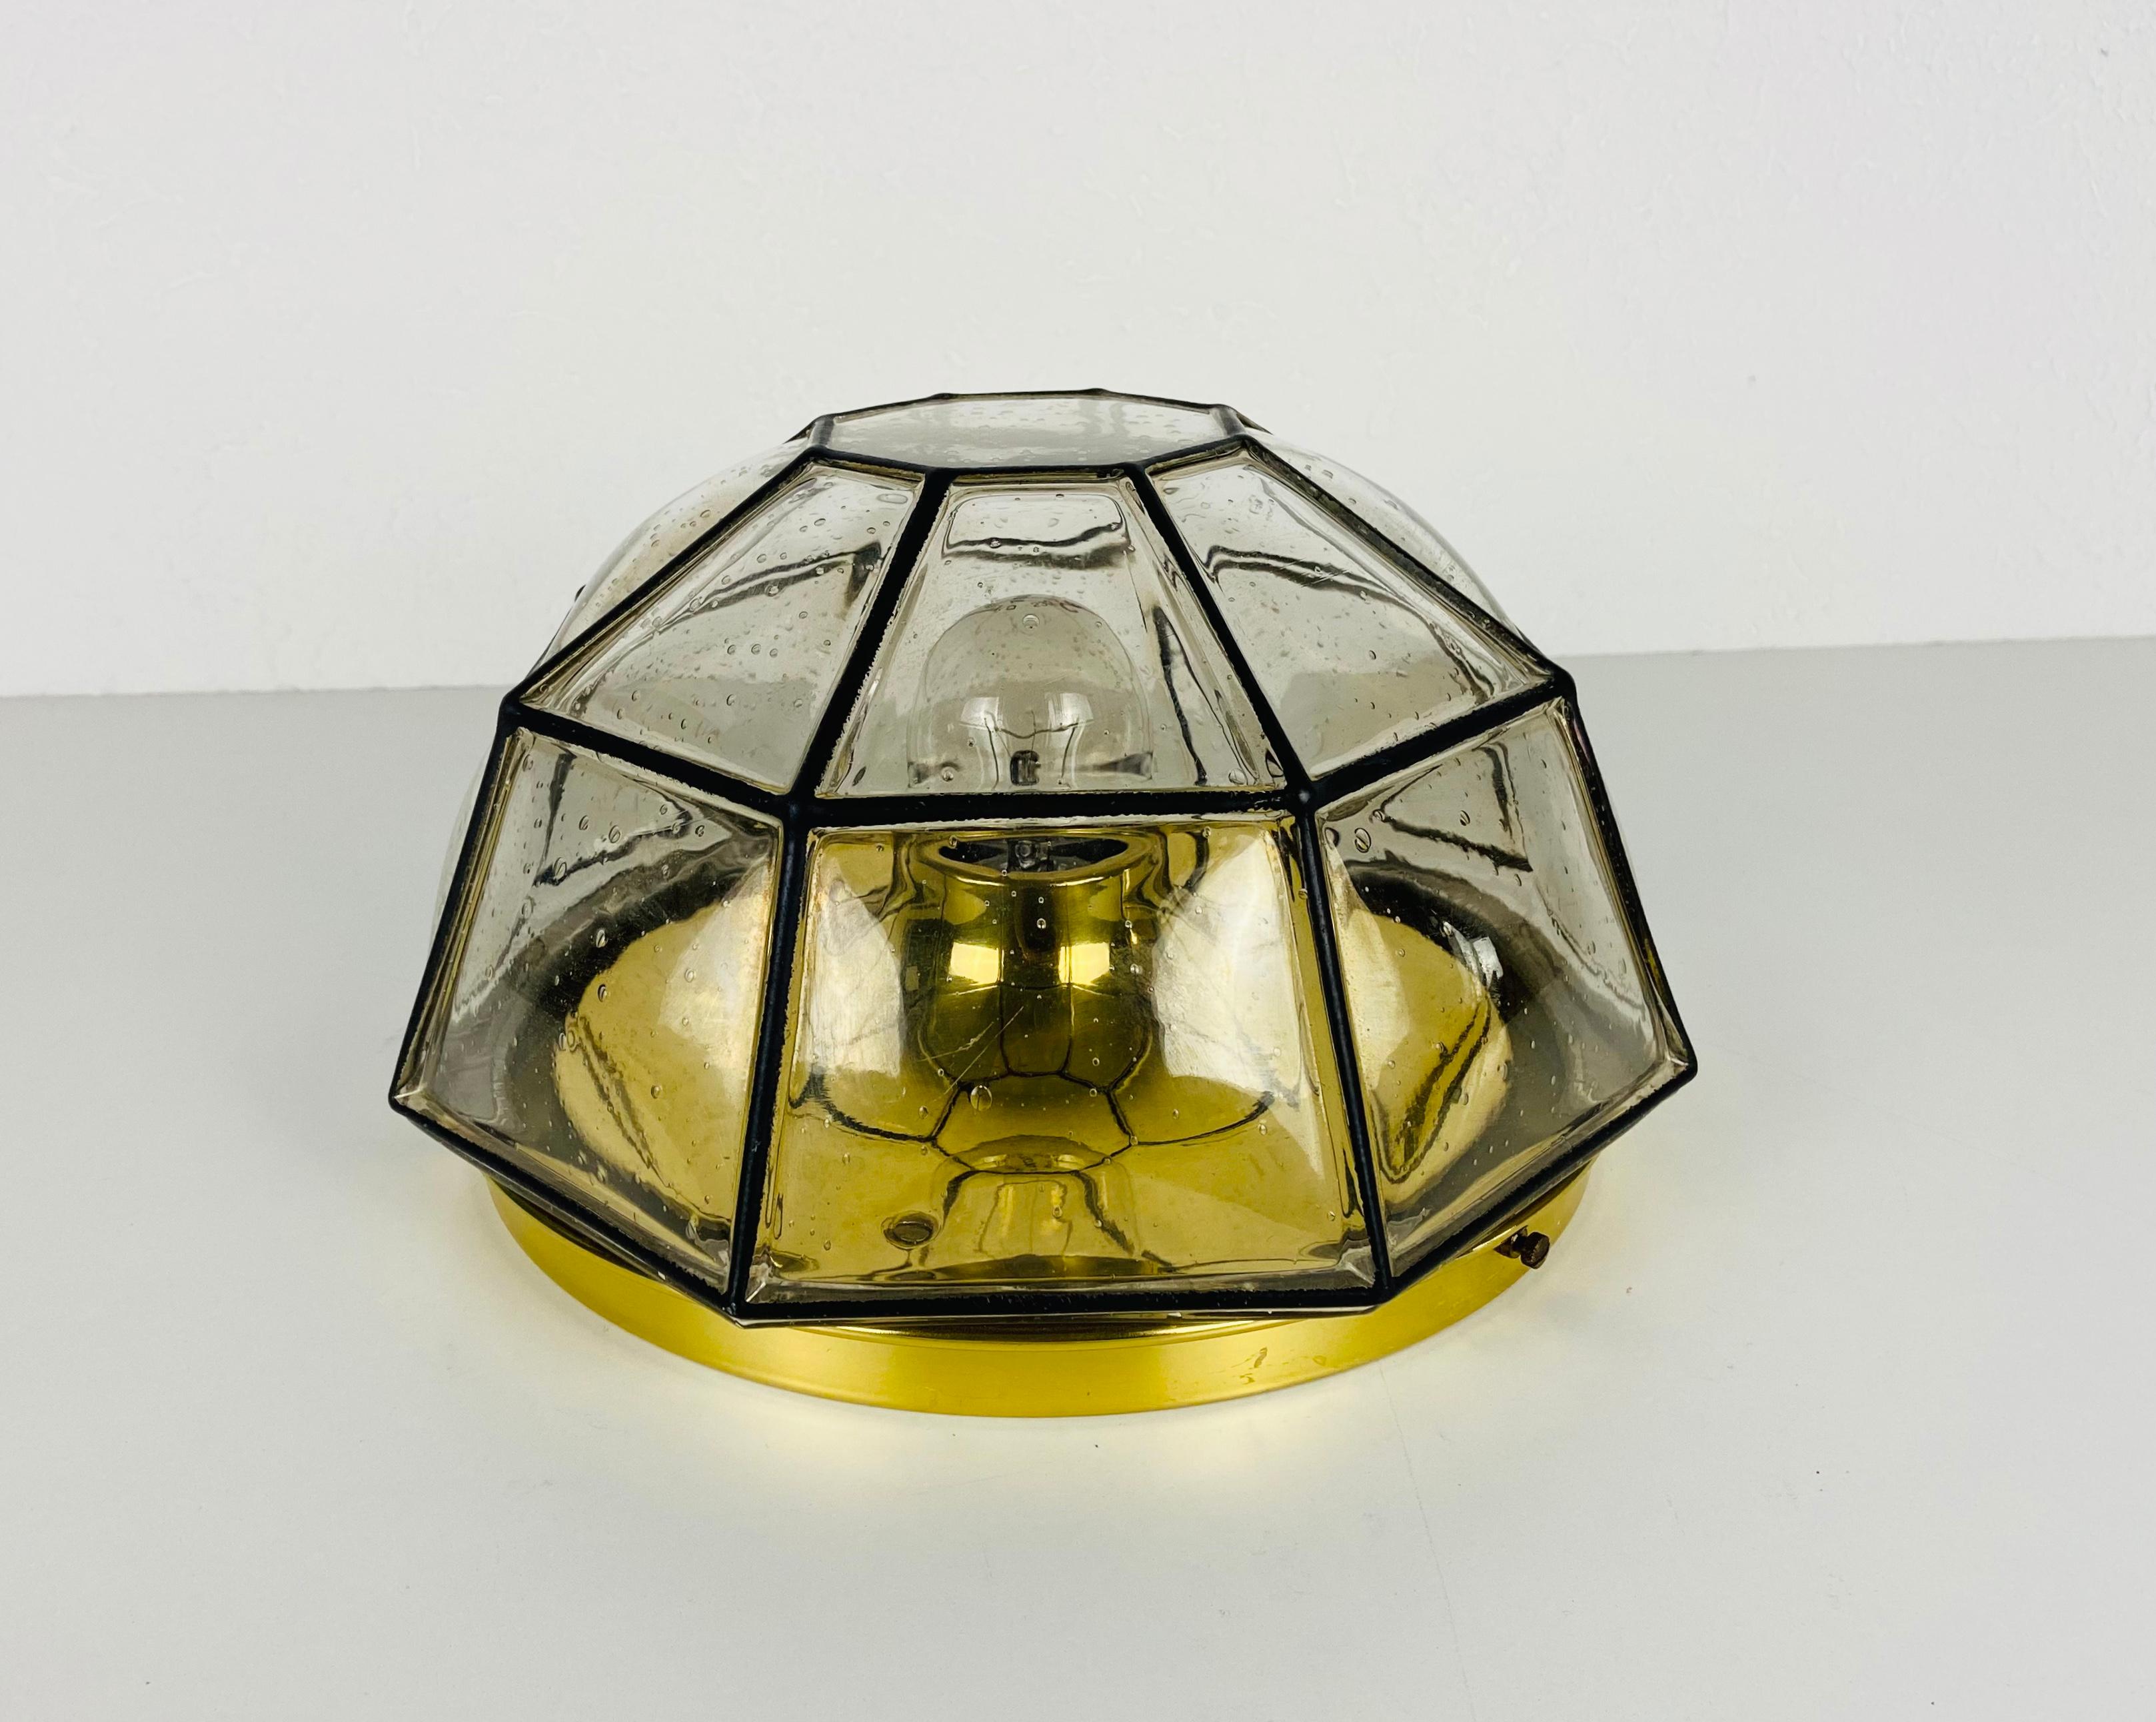 A Mid-Century Modern flush mount by Glashütte Limburg made in the 1960s in Germany. It is fascinating with its beautiful square shape and bubble glass. The fixture has a very nice Minimalist design.

The light requires one E27 (US E26) light bulb.